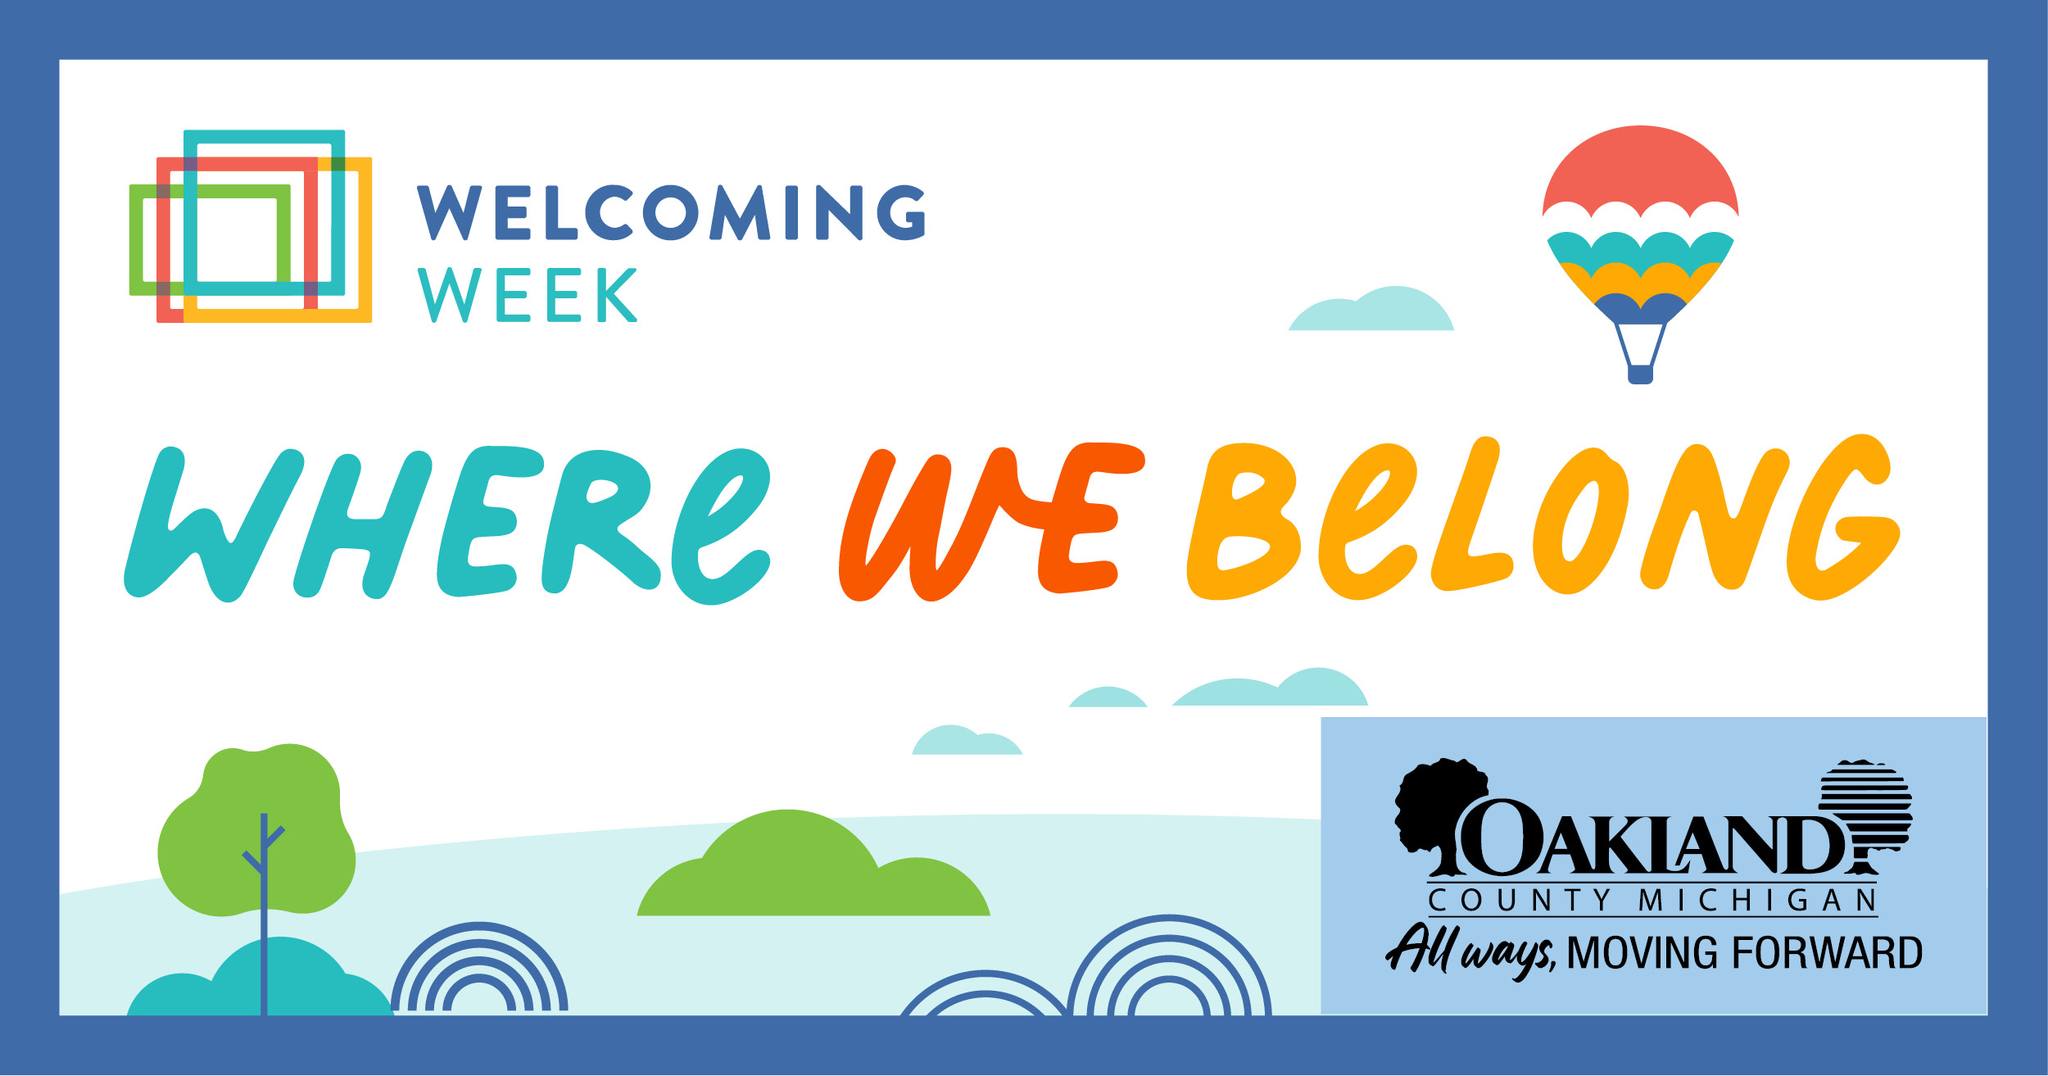 Graphic that reads "Welcoming Week" and "Where We Belong"